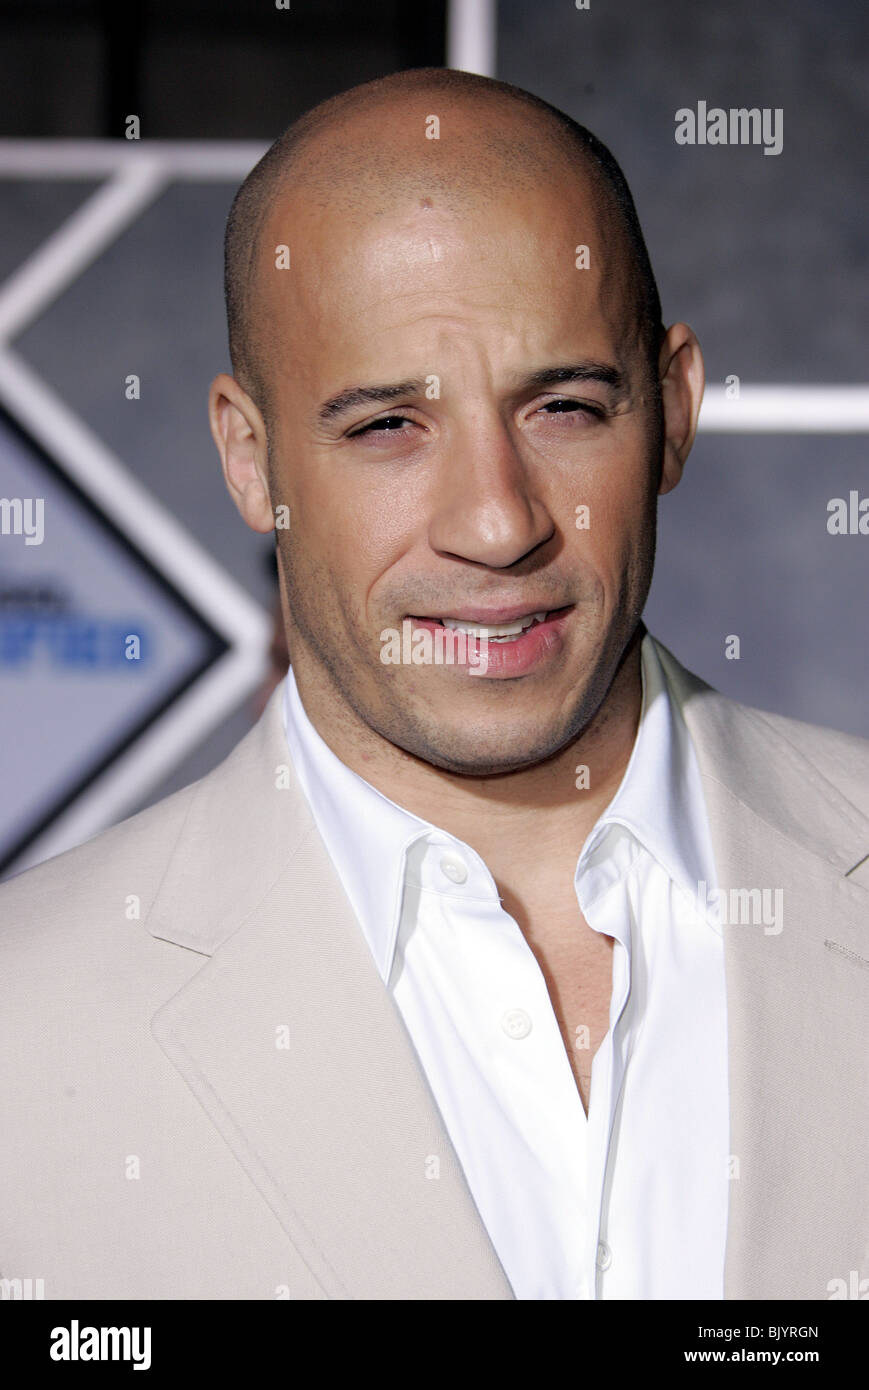 VIN DIESEL THE PACIFIER FILM PREMIERE EL CAPITAN THEATRE HOLLYWOOD LOS ANGELES USA 01 March 2005 Stock Photo